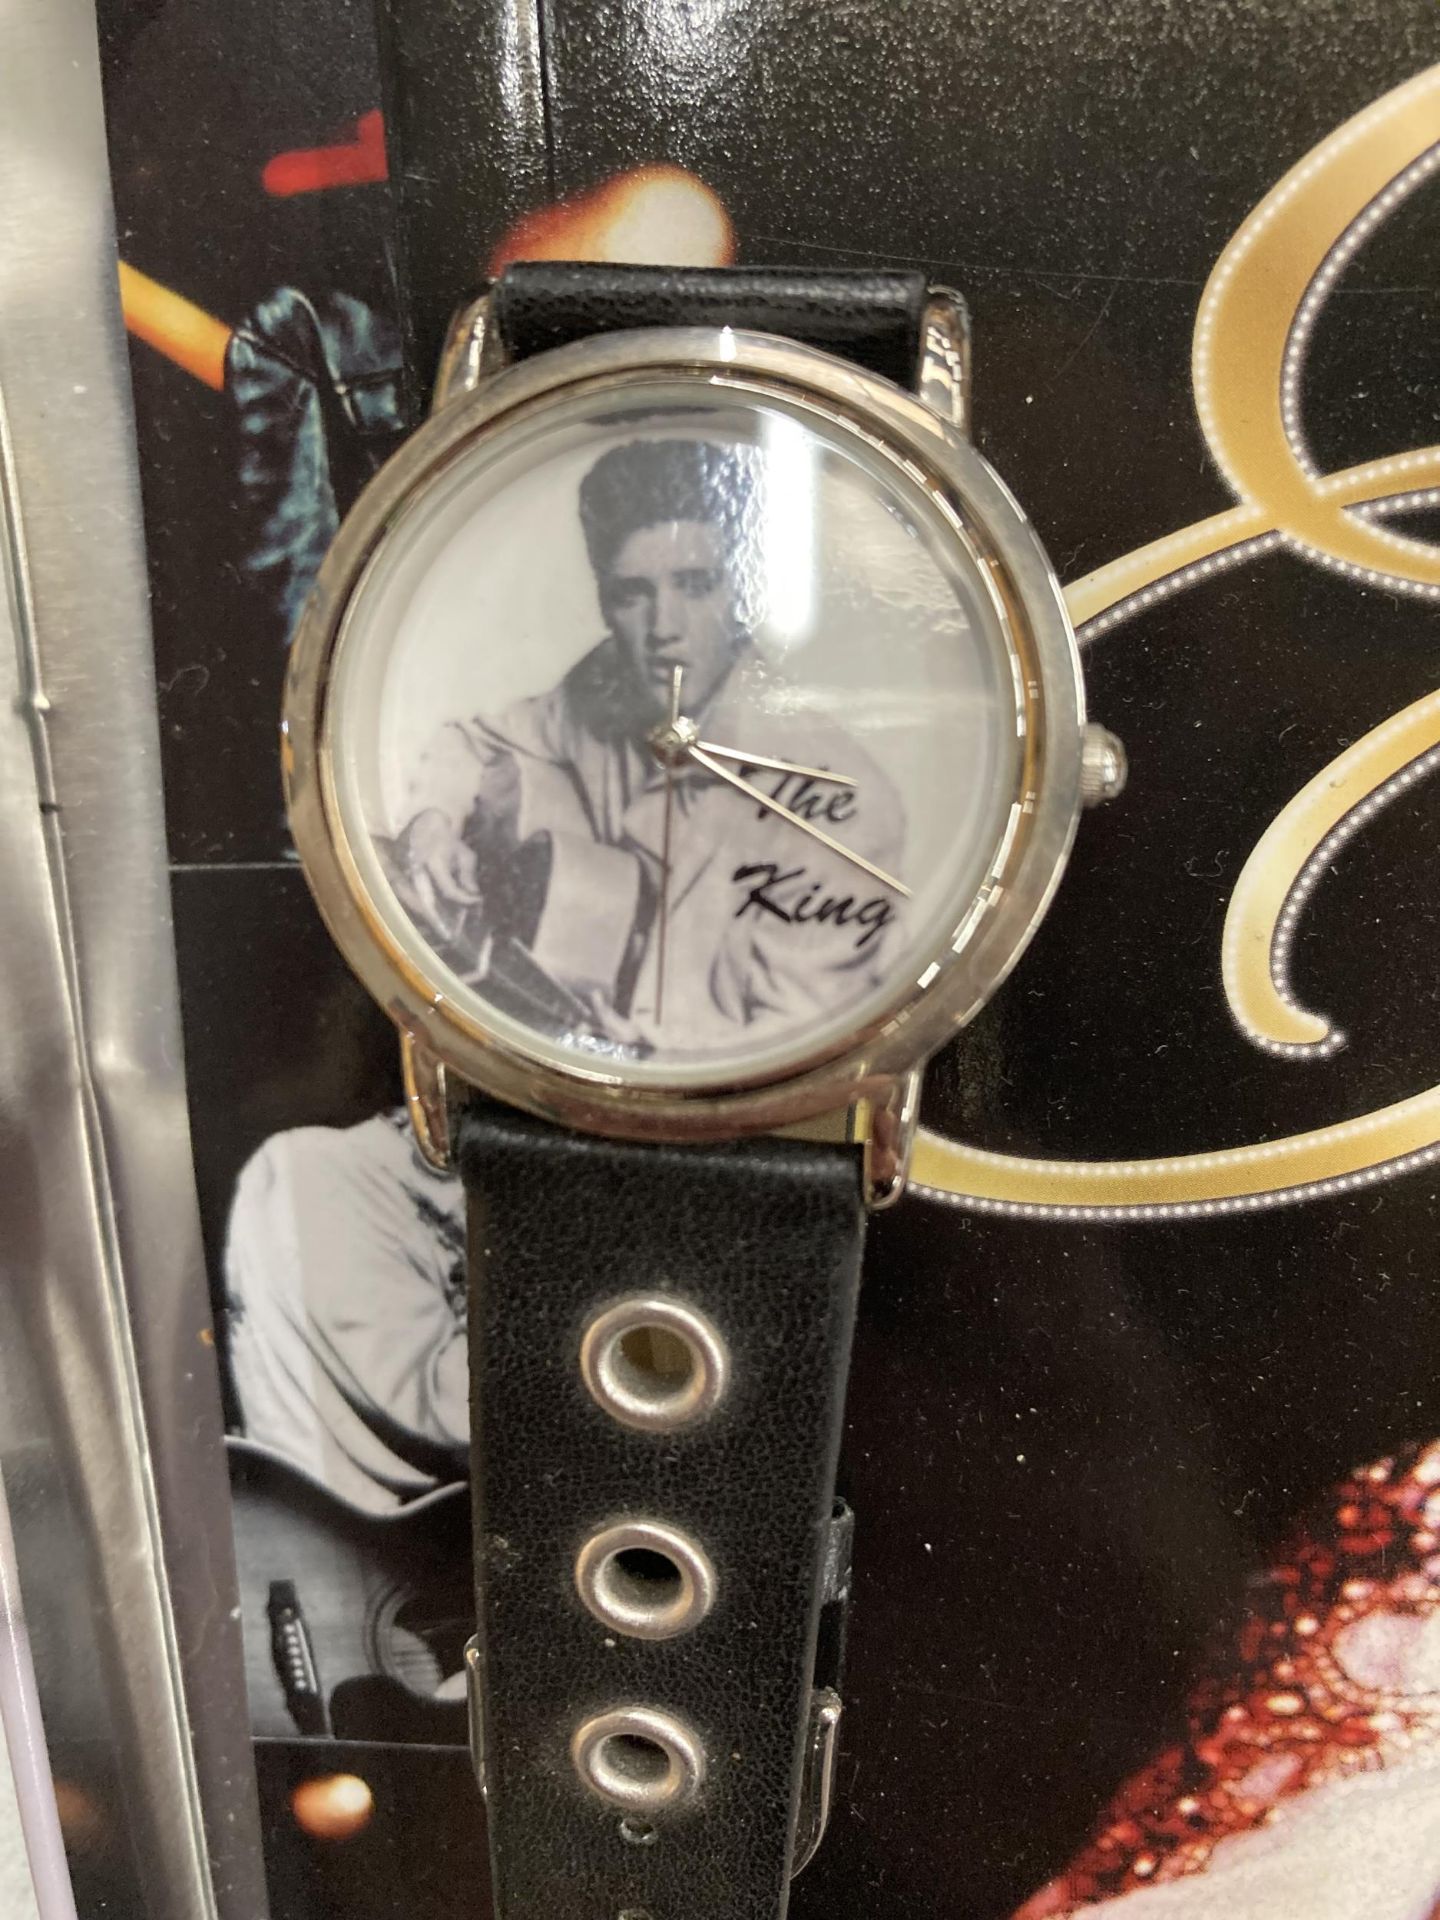 AN ELVIS WRISTWATCH PLUS A BOOK AND MAGNETS IN A PRESENTATION TIN - Image 3 of 3